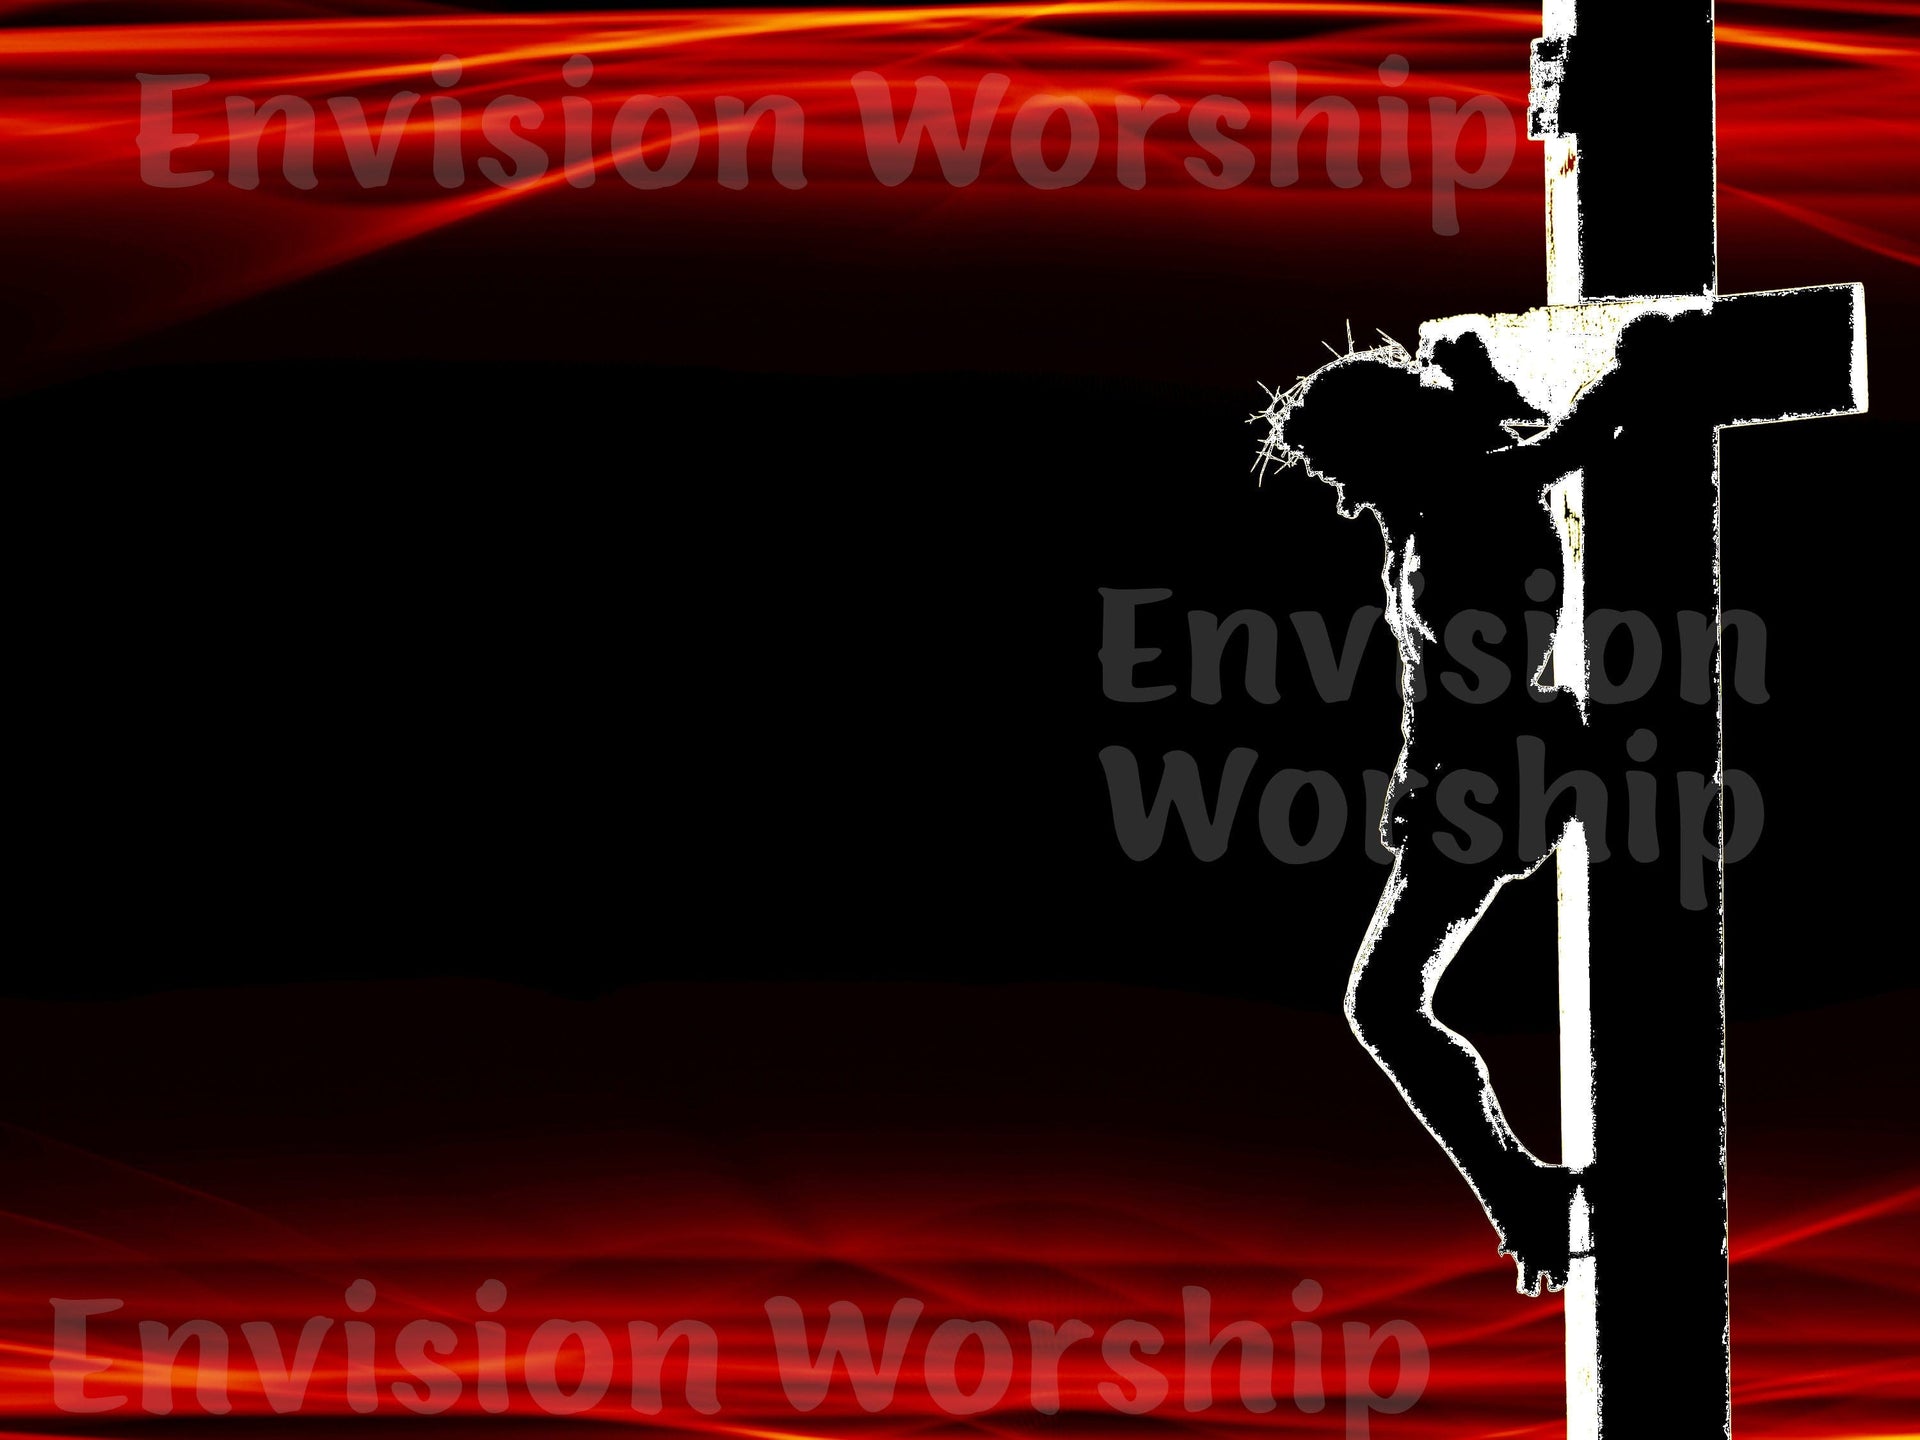 Crucifixion, Christ on the Cross, Jesus on the Cross, Good Friday Church PowerPoint, Jesus crucified